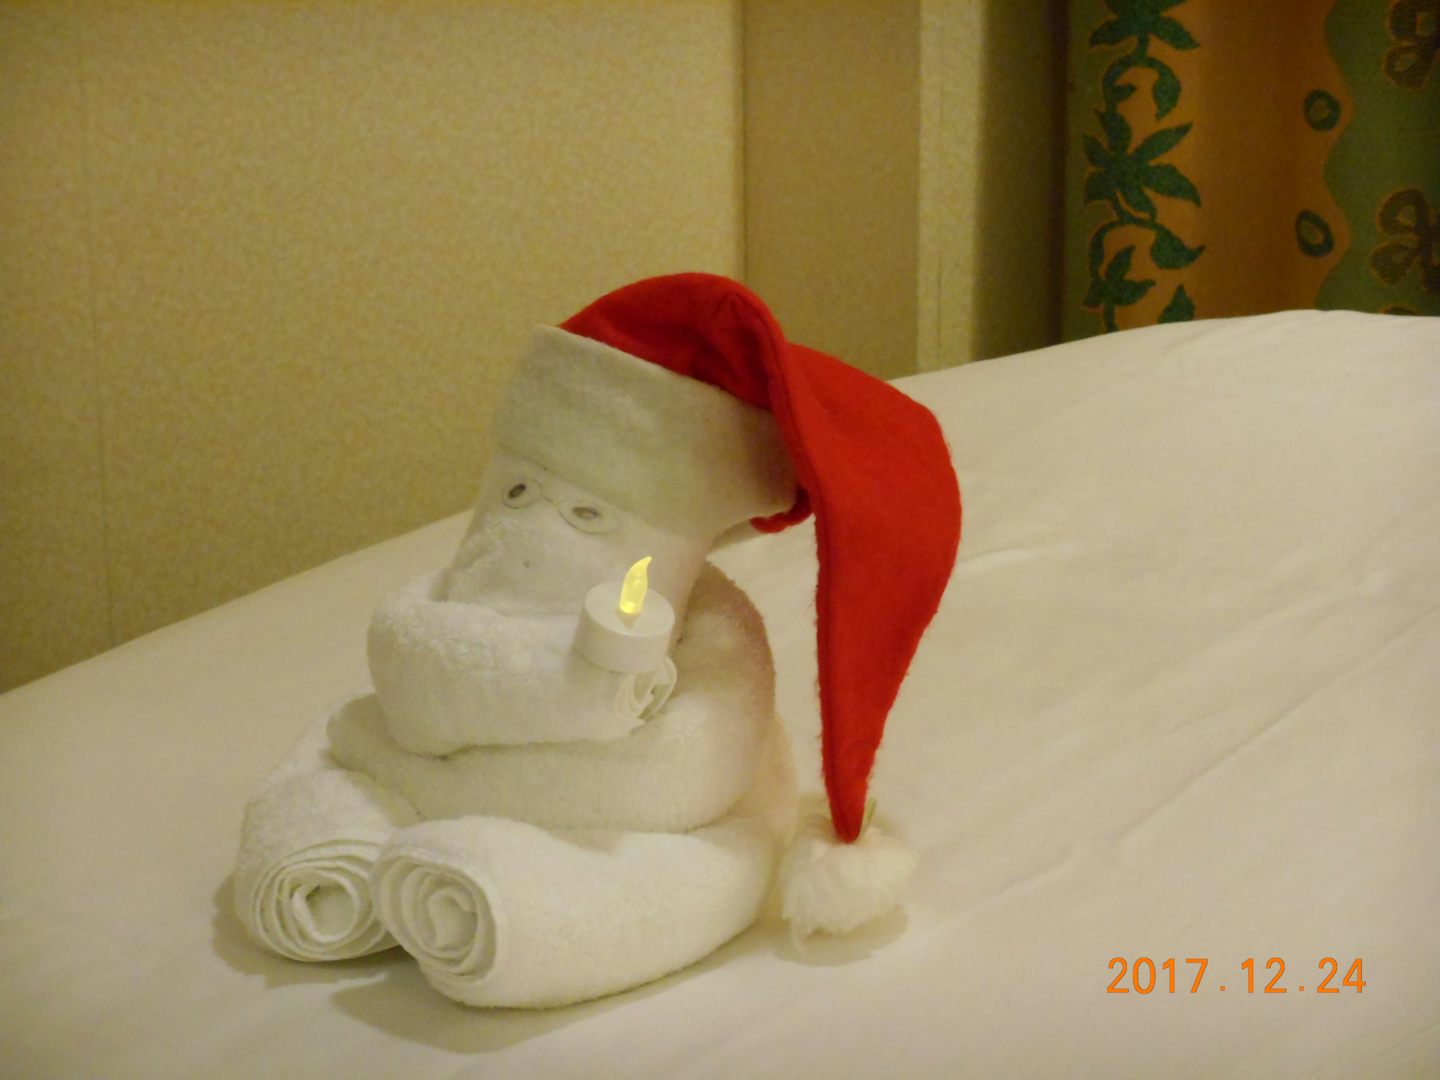 Xmas towel art on our bed from Cabin Steward, items found in our cabin.